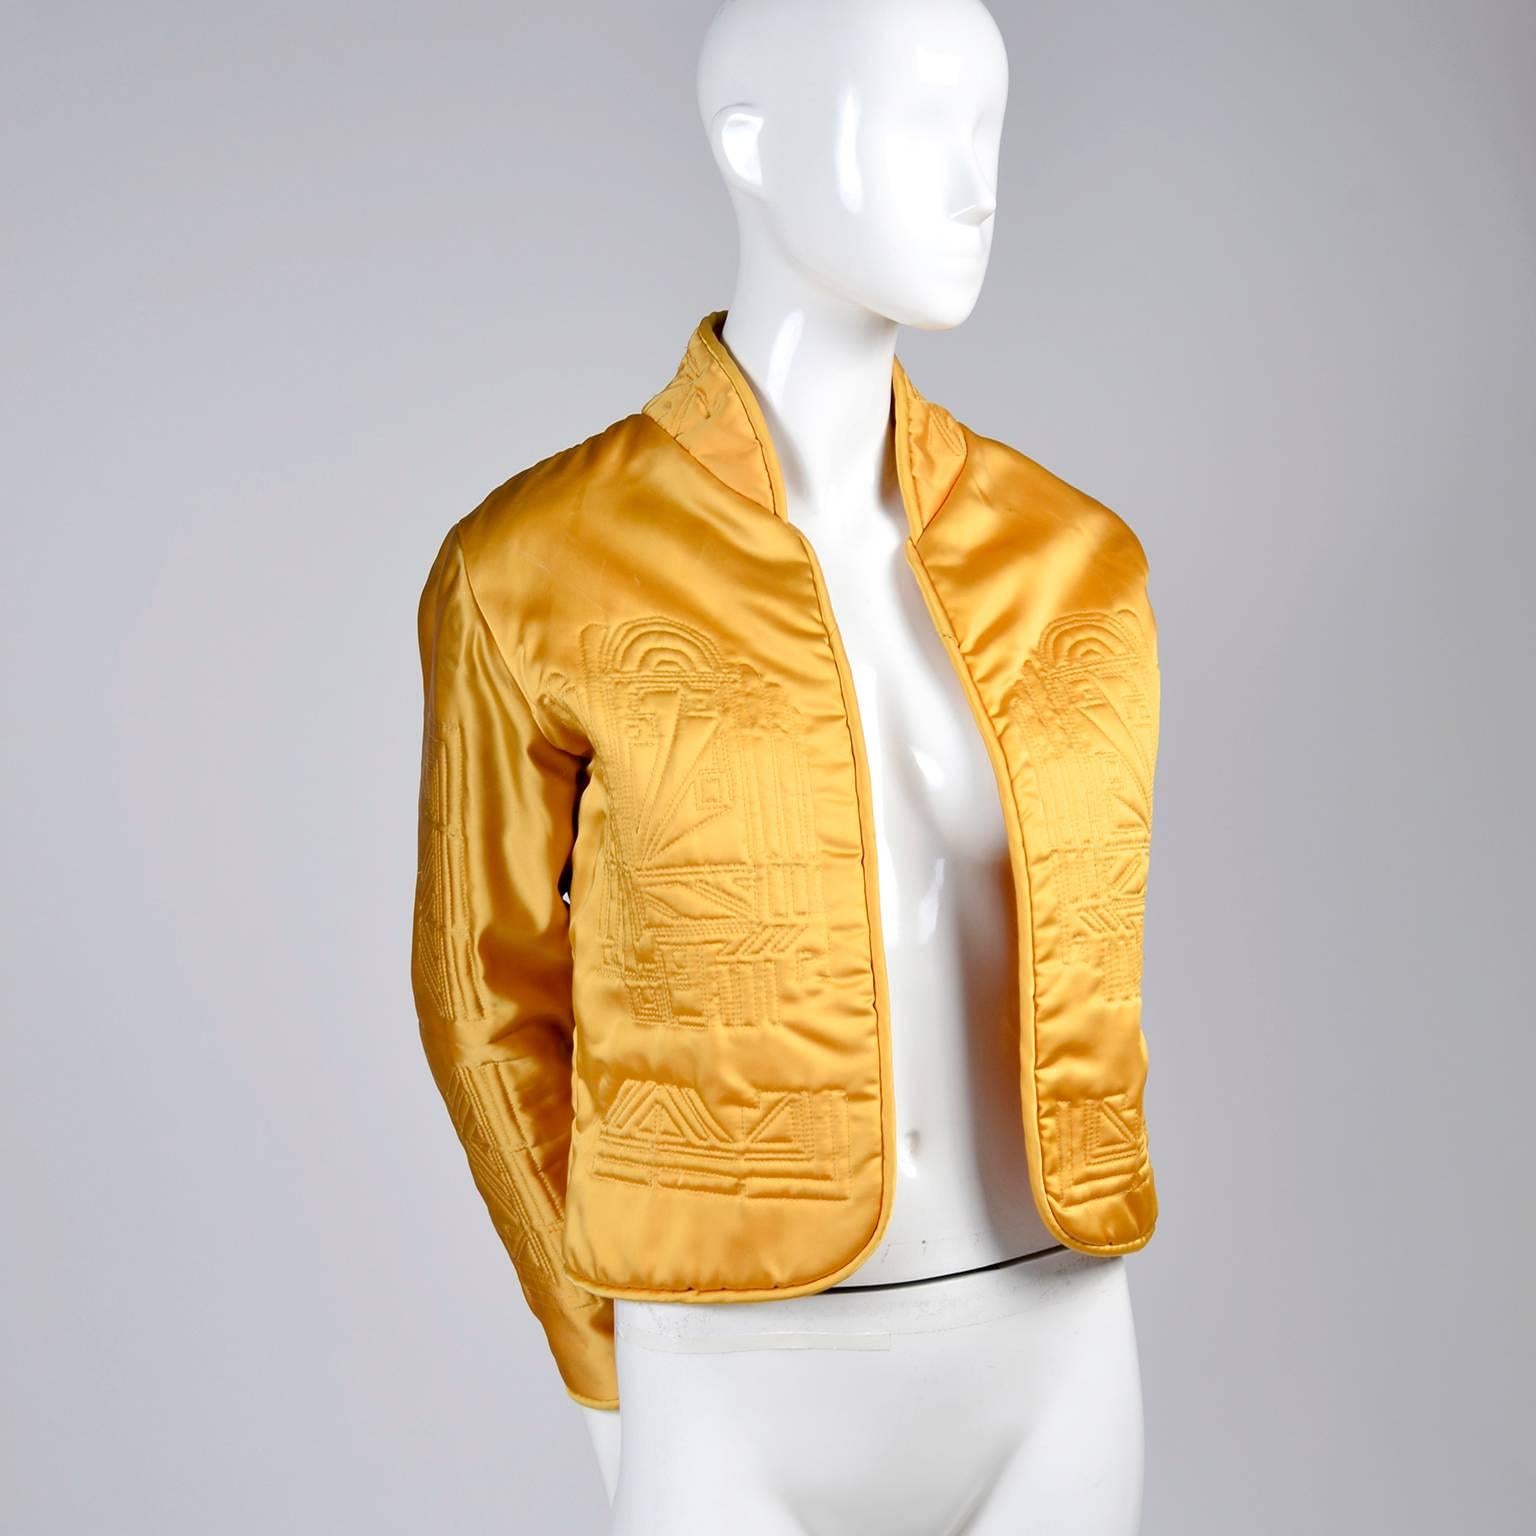 This is a great quilted gold jacket purchased in the late 1980's at a boutique in Portland Oregon called Elizabeth Street. This gorgeous little satin jacket has rolled edges and an open front with art deco style designs quilted into the gold silk.